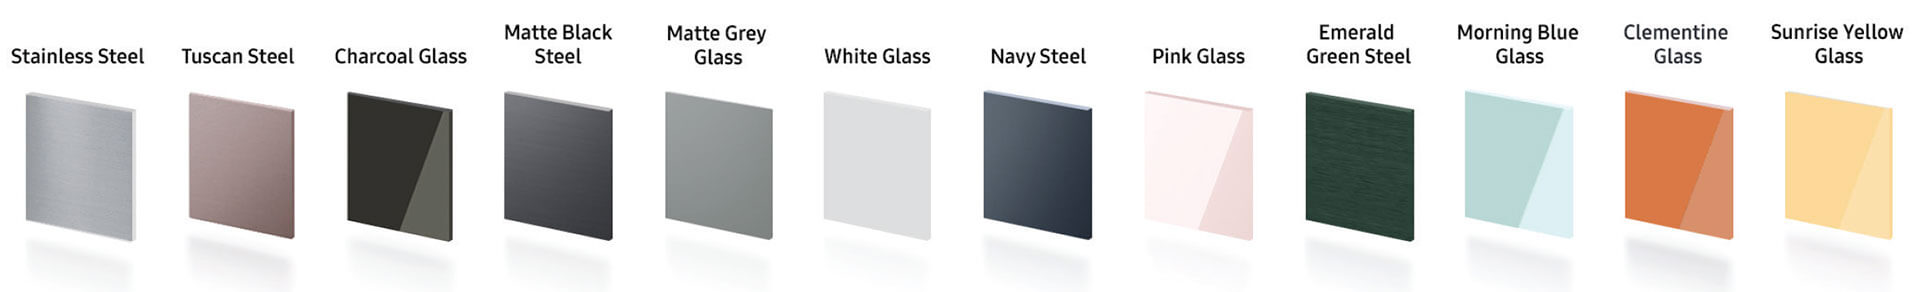 Samsung Bespoke Color & Finish Choices